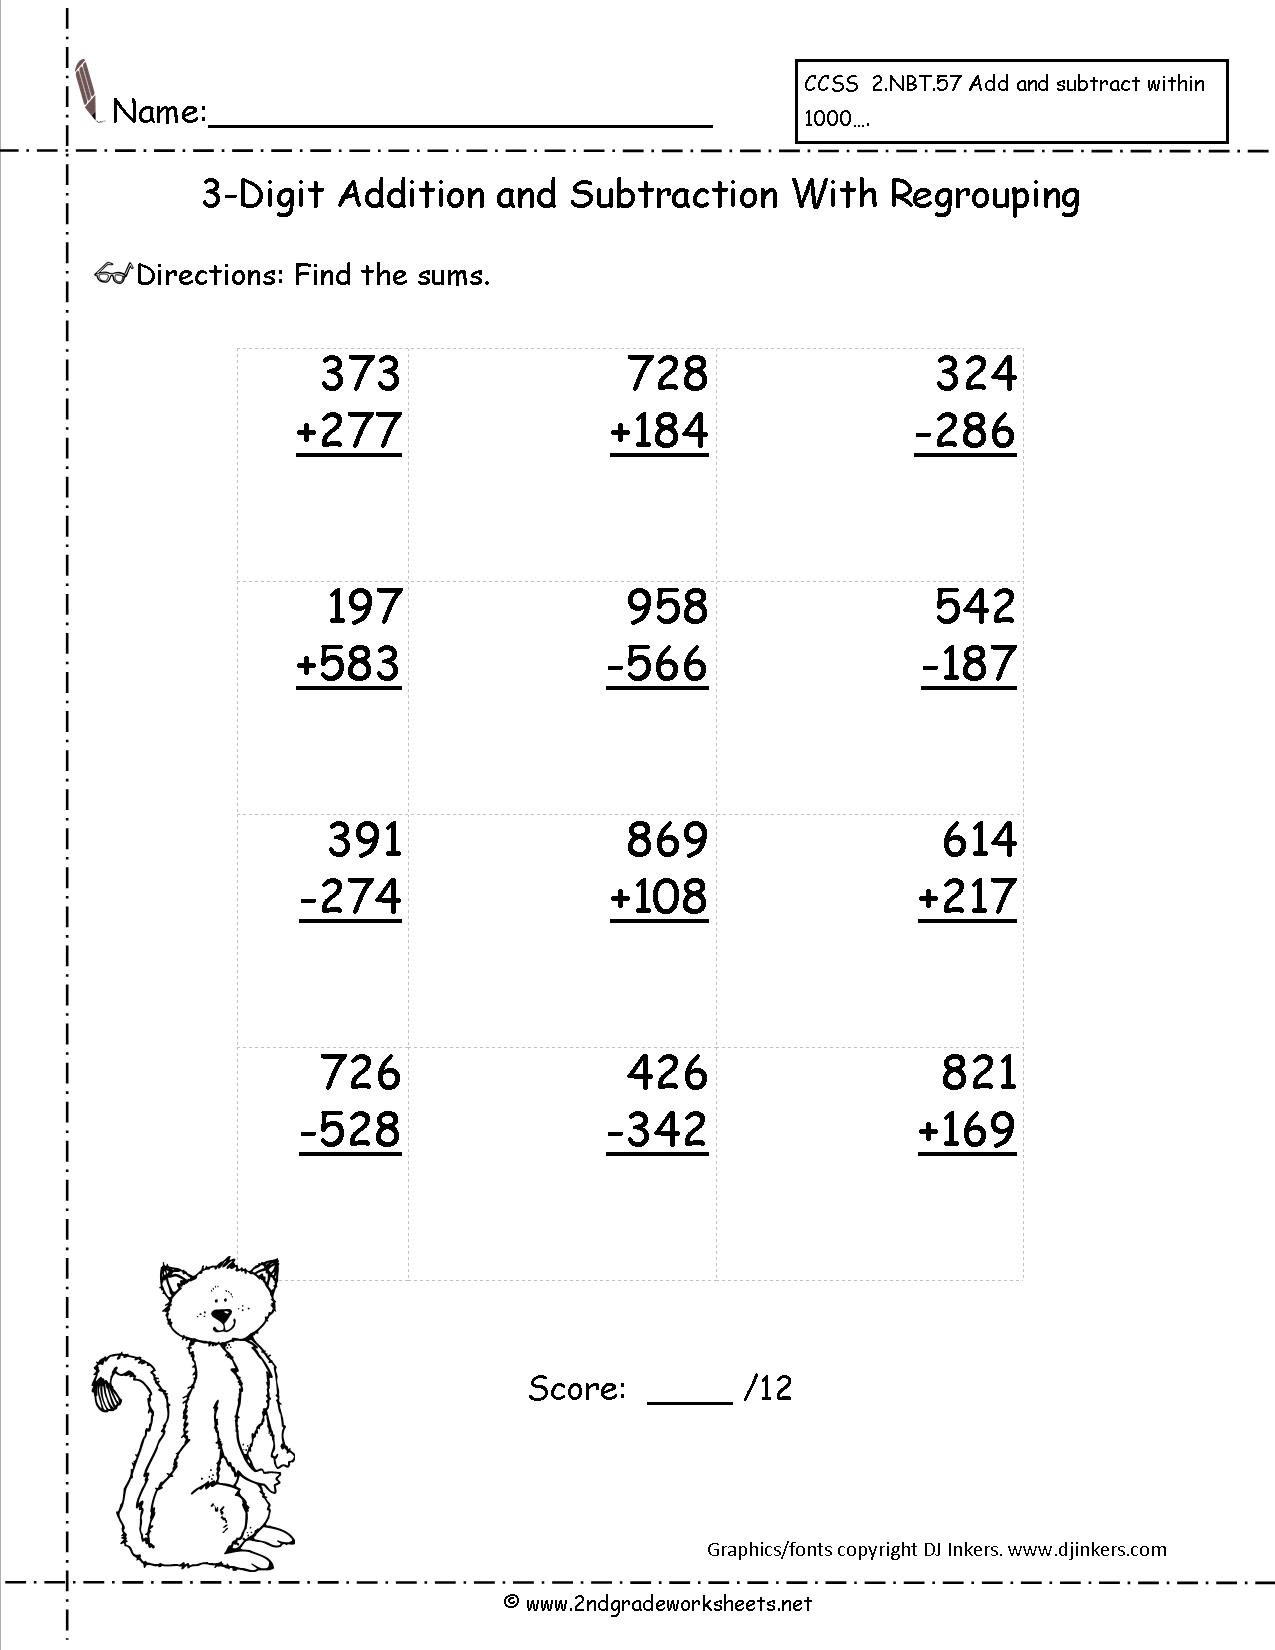 Three Digit Addition And Subtraction Worksheets From The Teacher&amp;#039;s Guide | Free Printable Addition And Subtraction Worksheets With Regrouping